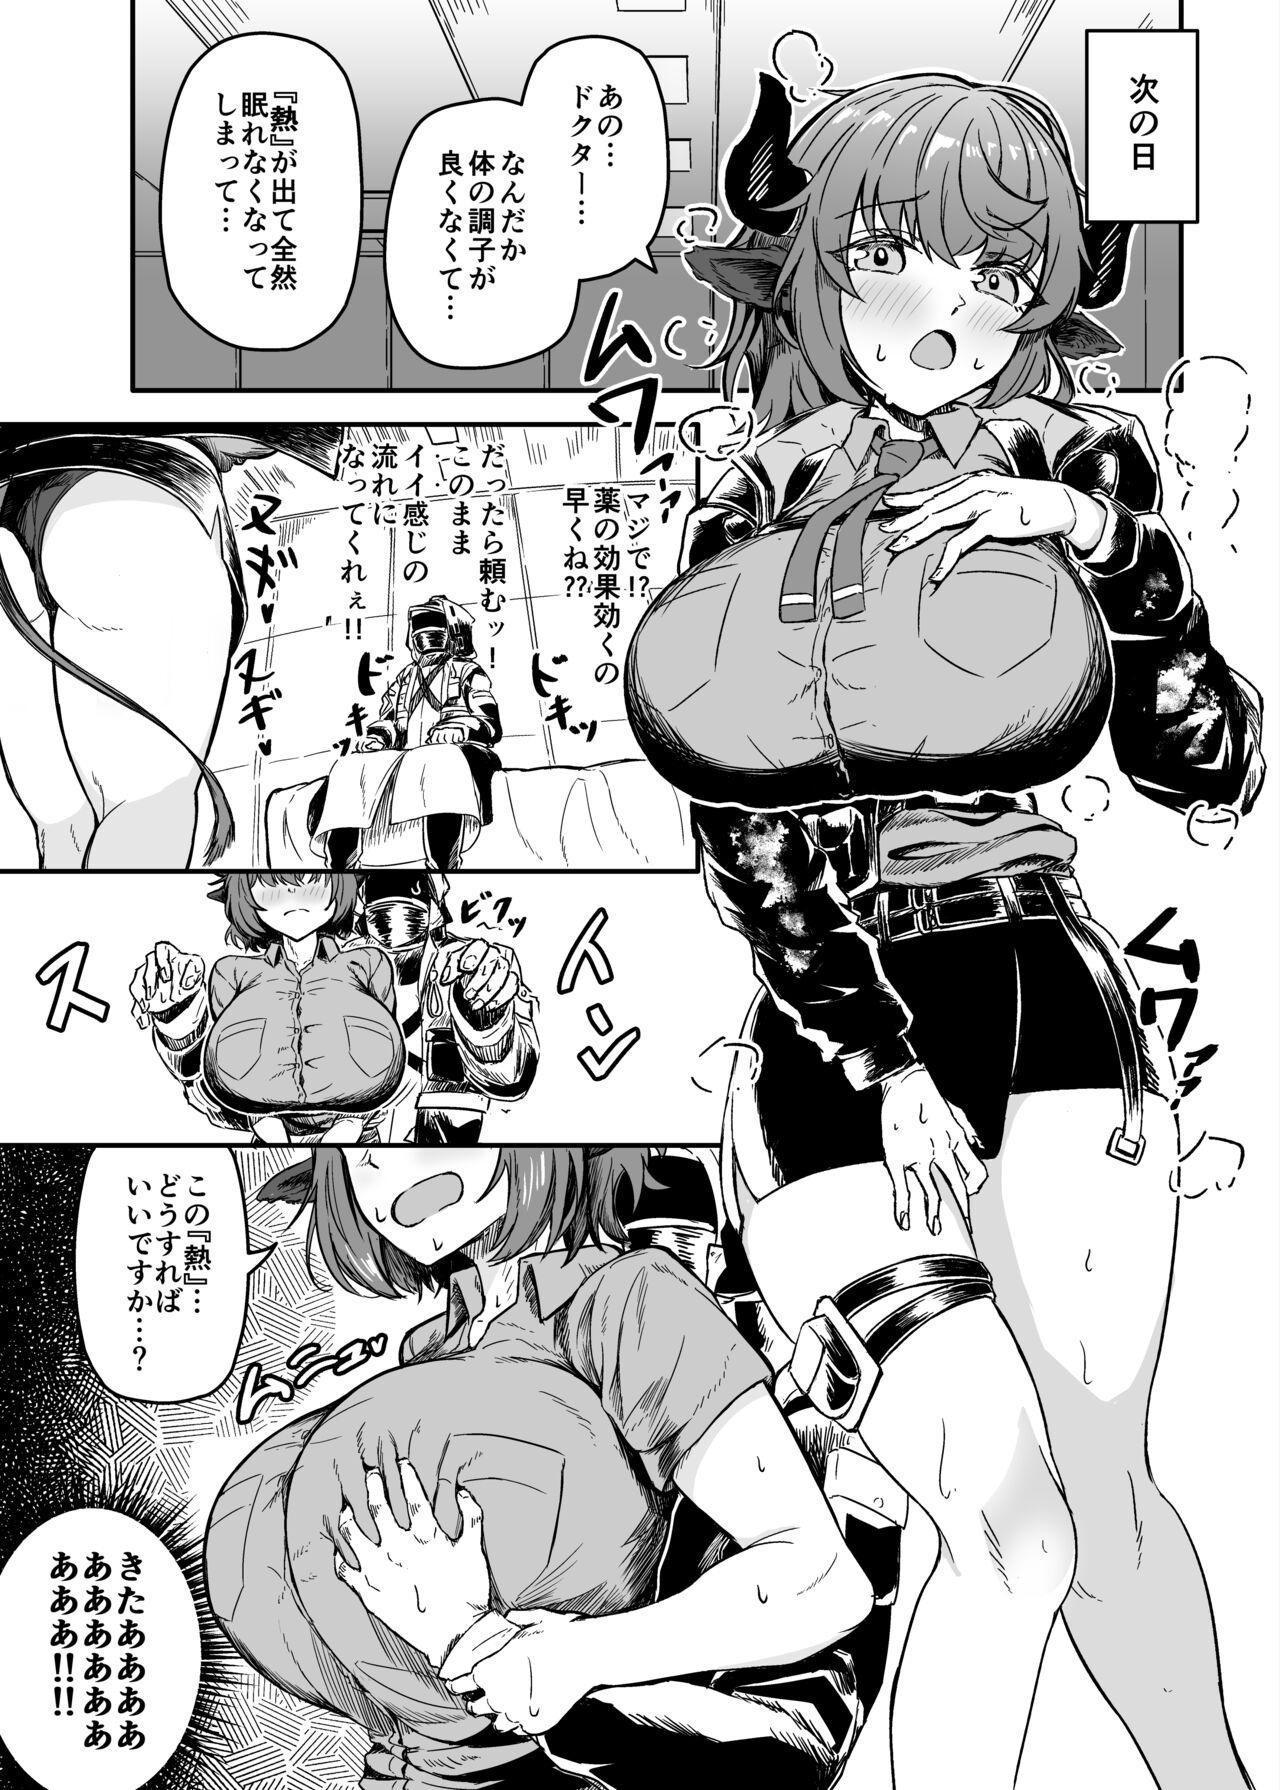 Oldyoung 巨乳契约 - Arknights Swallowing - Page 5